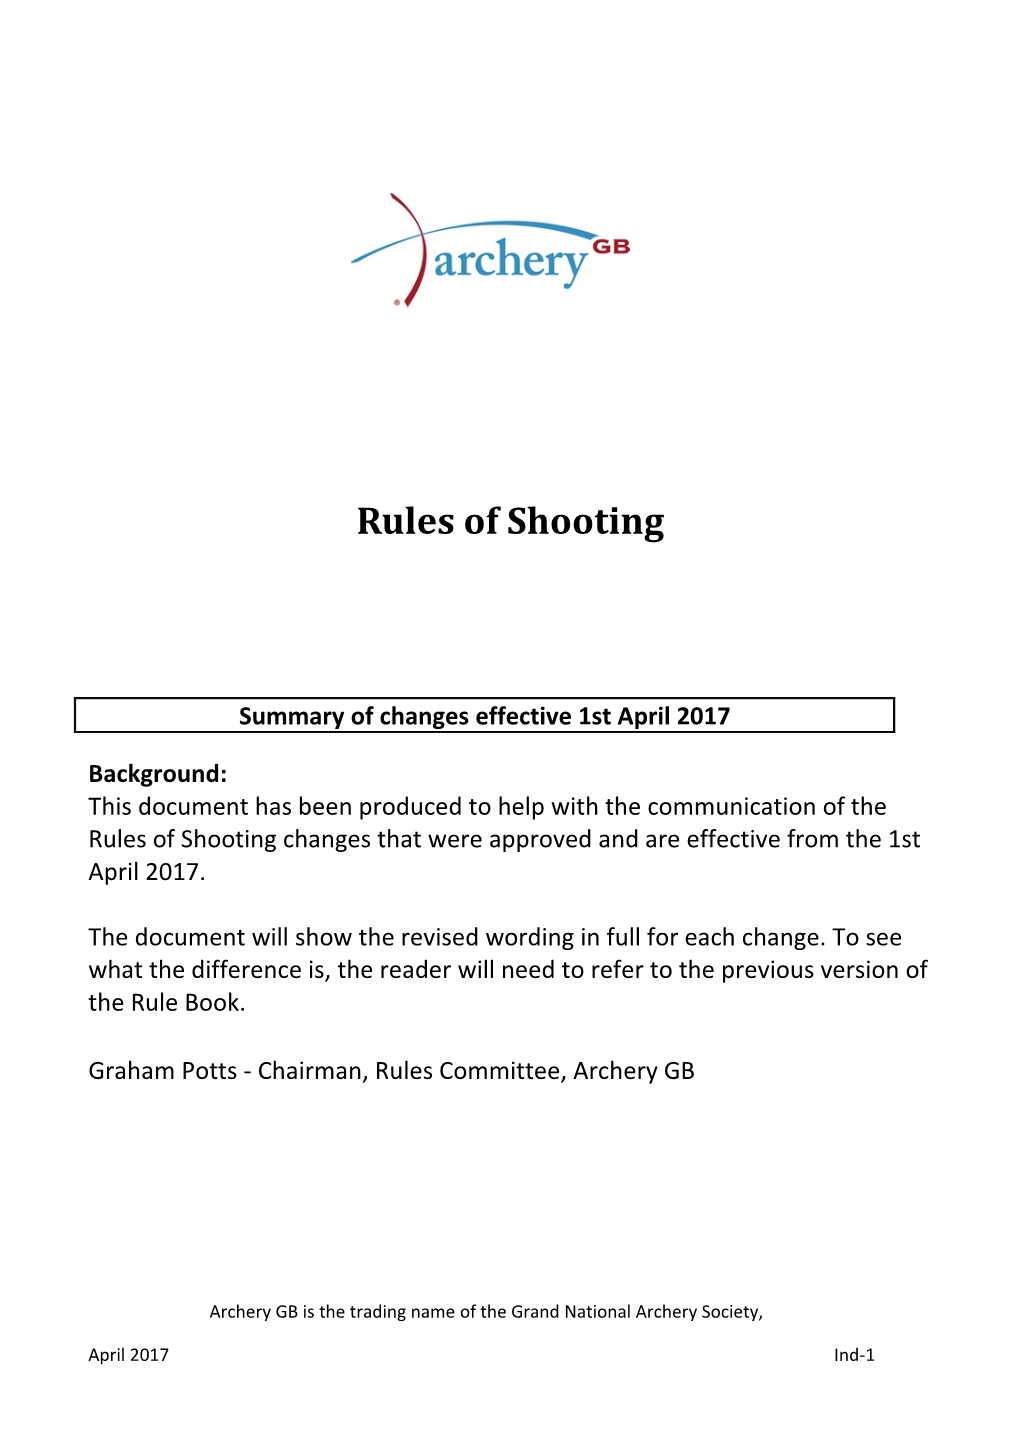 Rules of Shooting